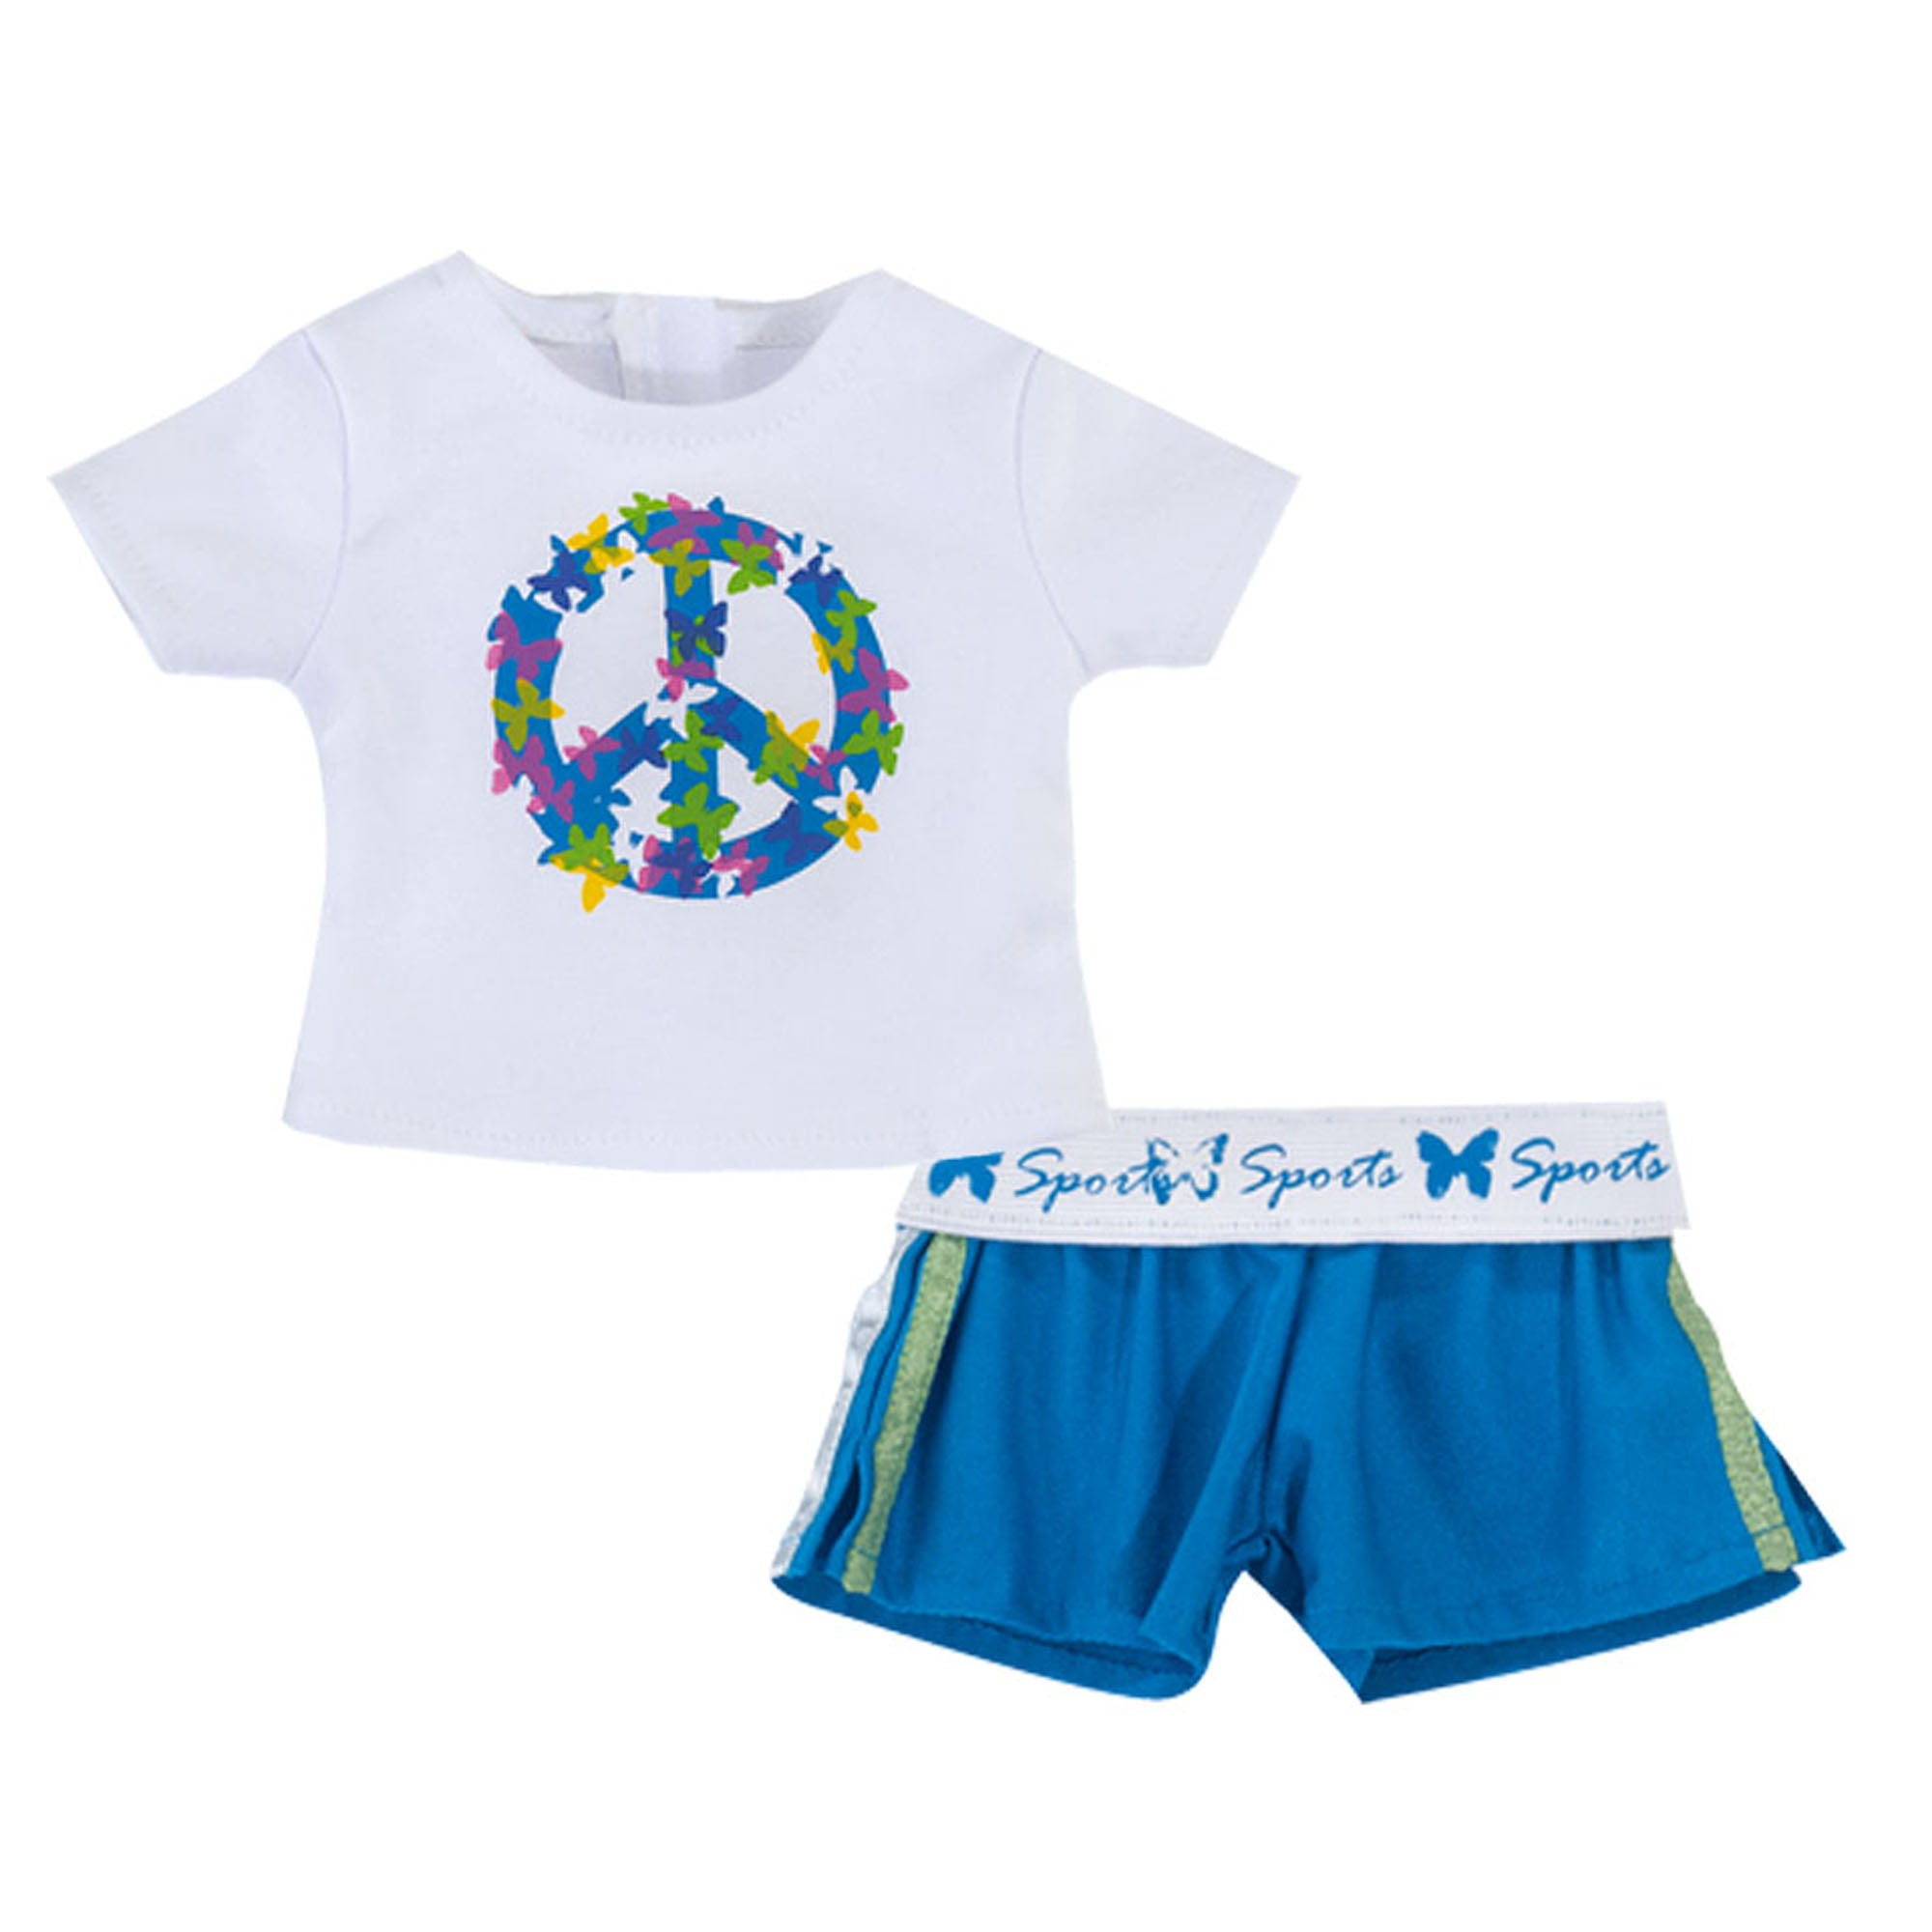 Sophia’s Mix & Match Spring Peace Sign Short Sleeve Tee Shirt & Sports Shorts with Elastic Waistband for 18” Dolls, White/Blue